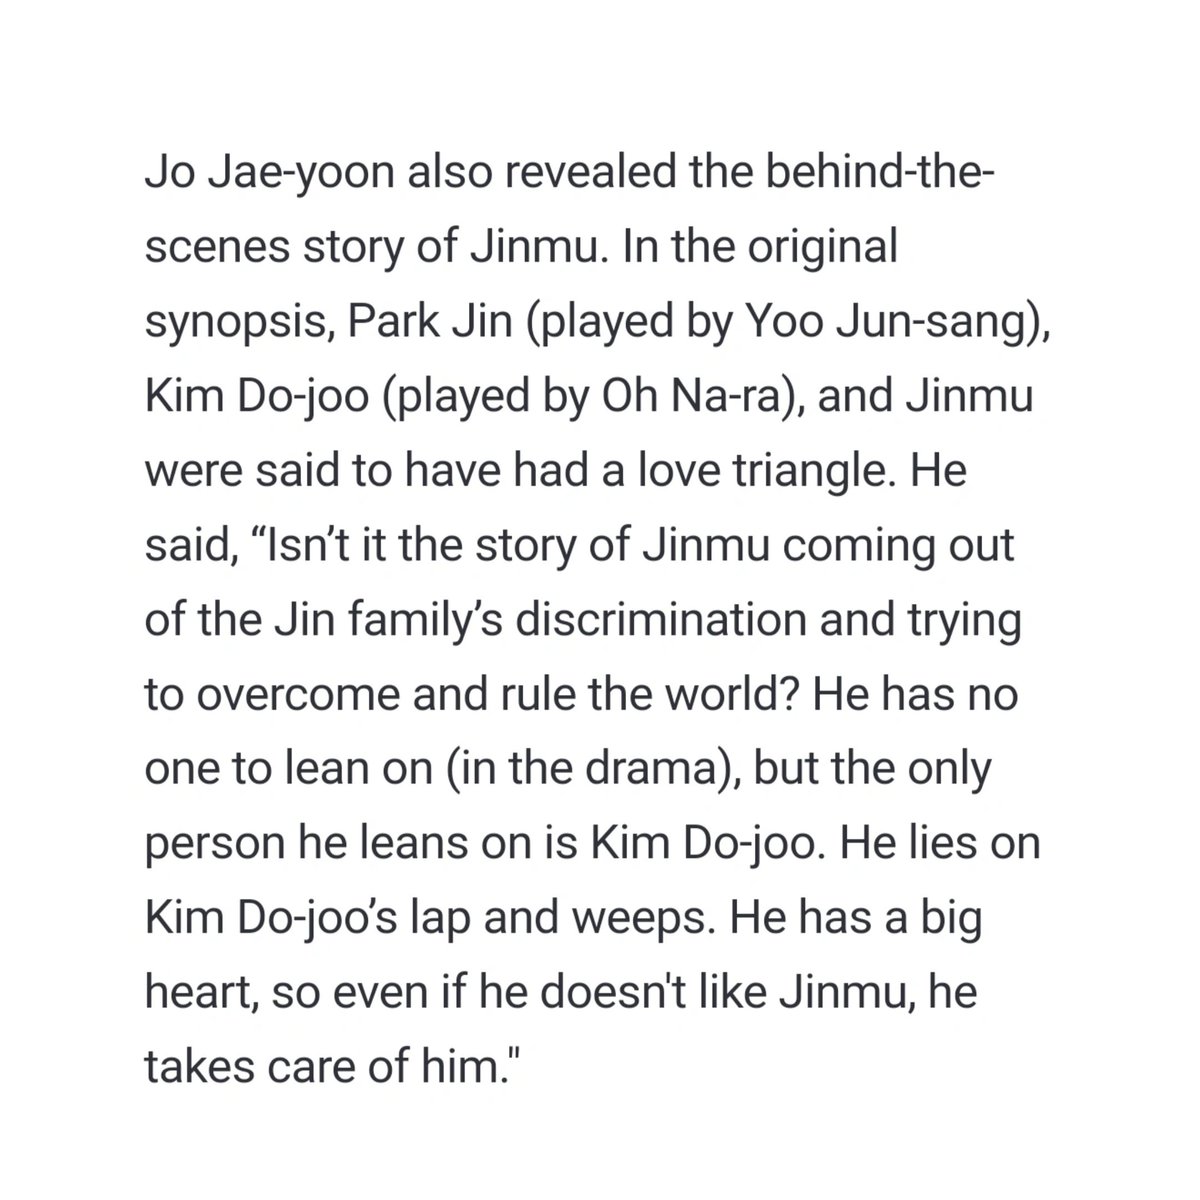 jo jaeyun mentioned that the original synopsis was actually a love triangle with park jin, kim dojoo and jinmu. since jinmu has no one to rely on he fell in love with kim dojoo, the only person who cares for him

#OhNara #YooJunsang #JoJaeyun
#AlchemyOfSouls #AlchemyOfSouls2